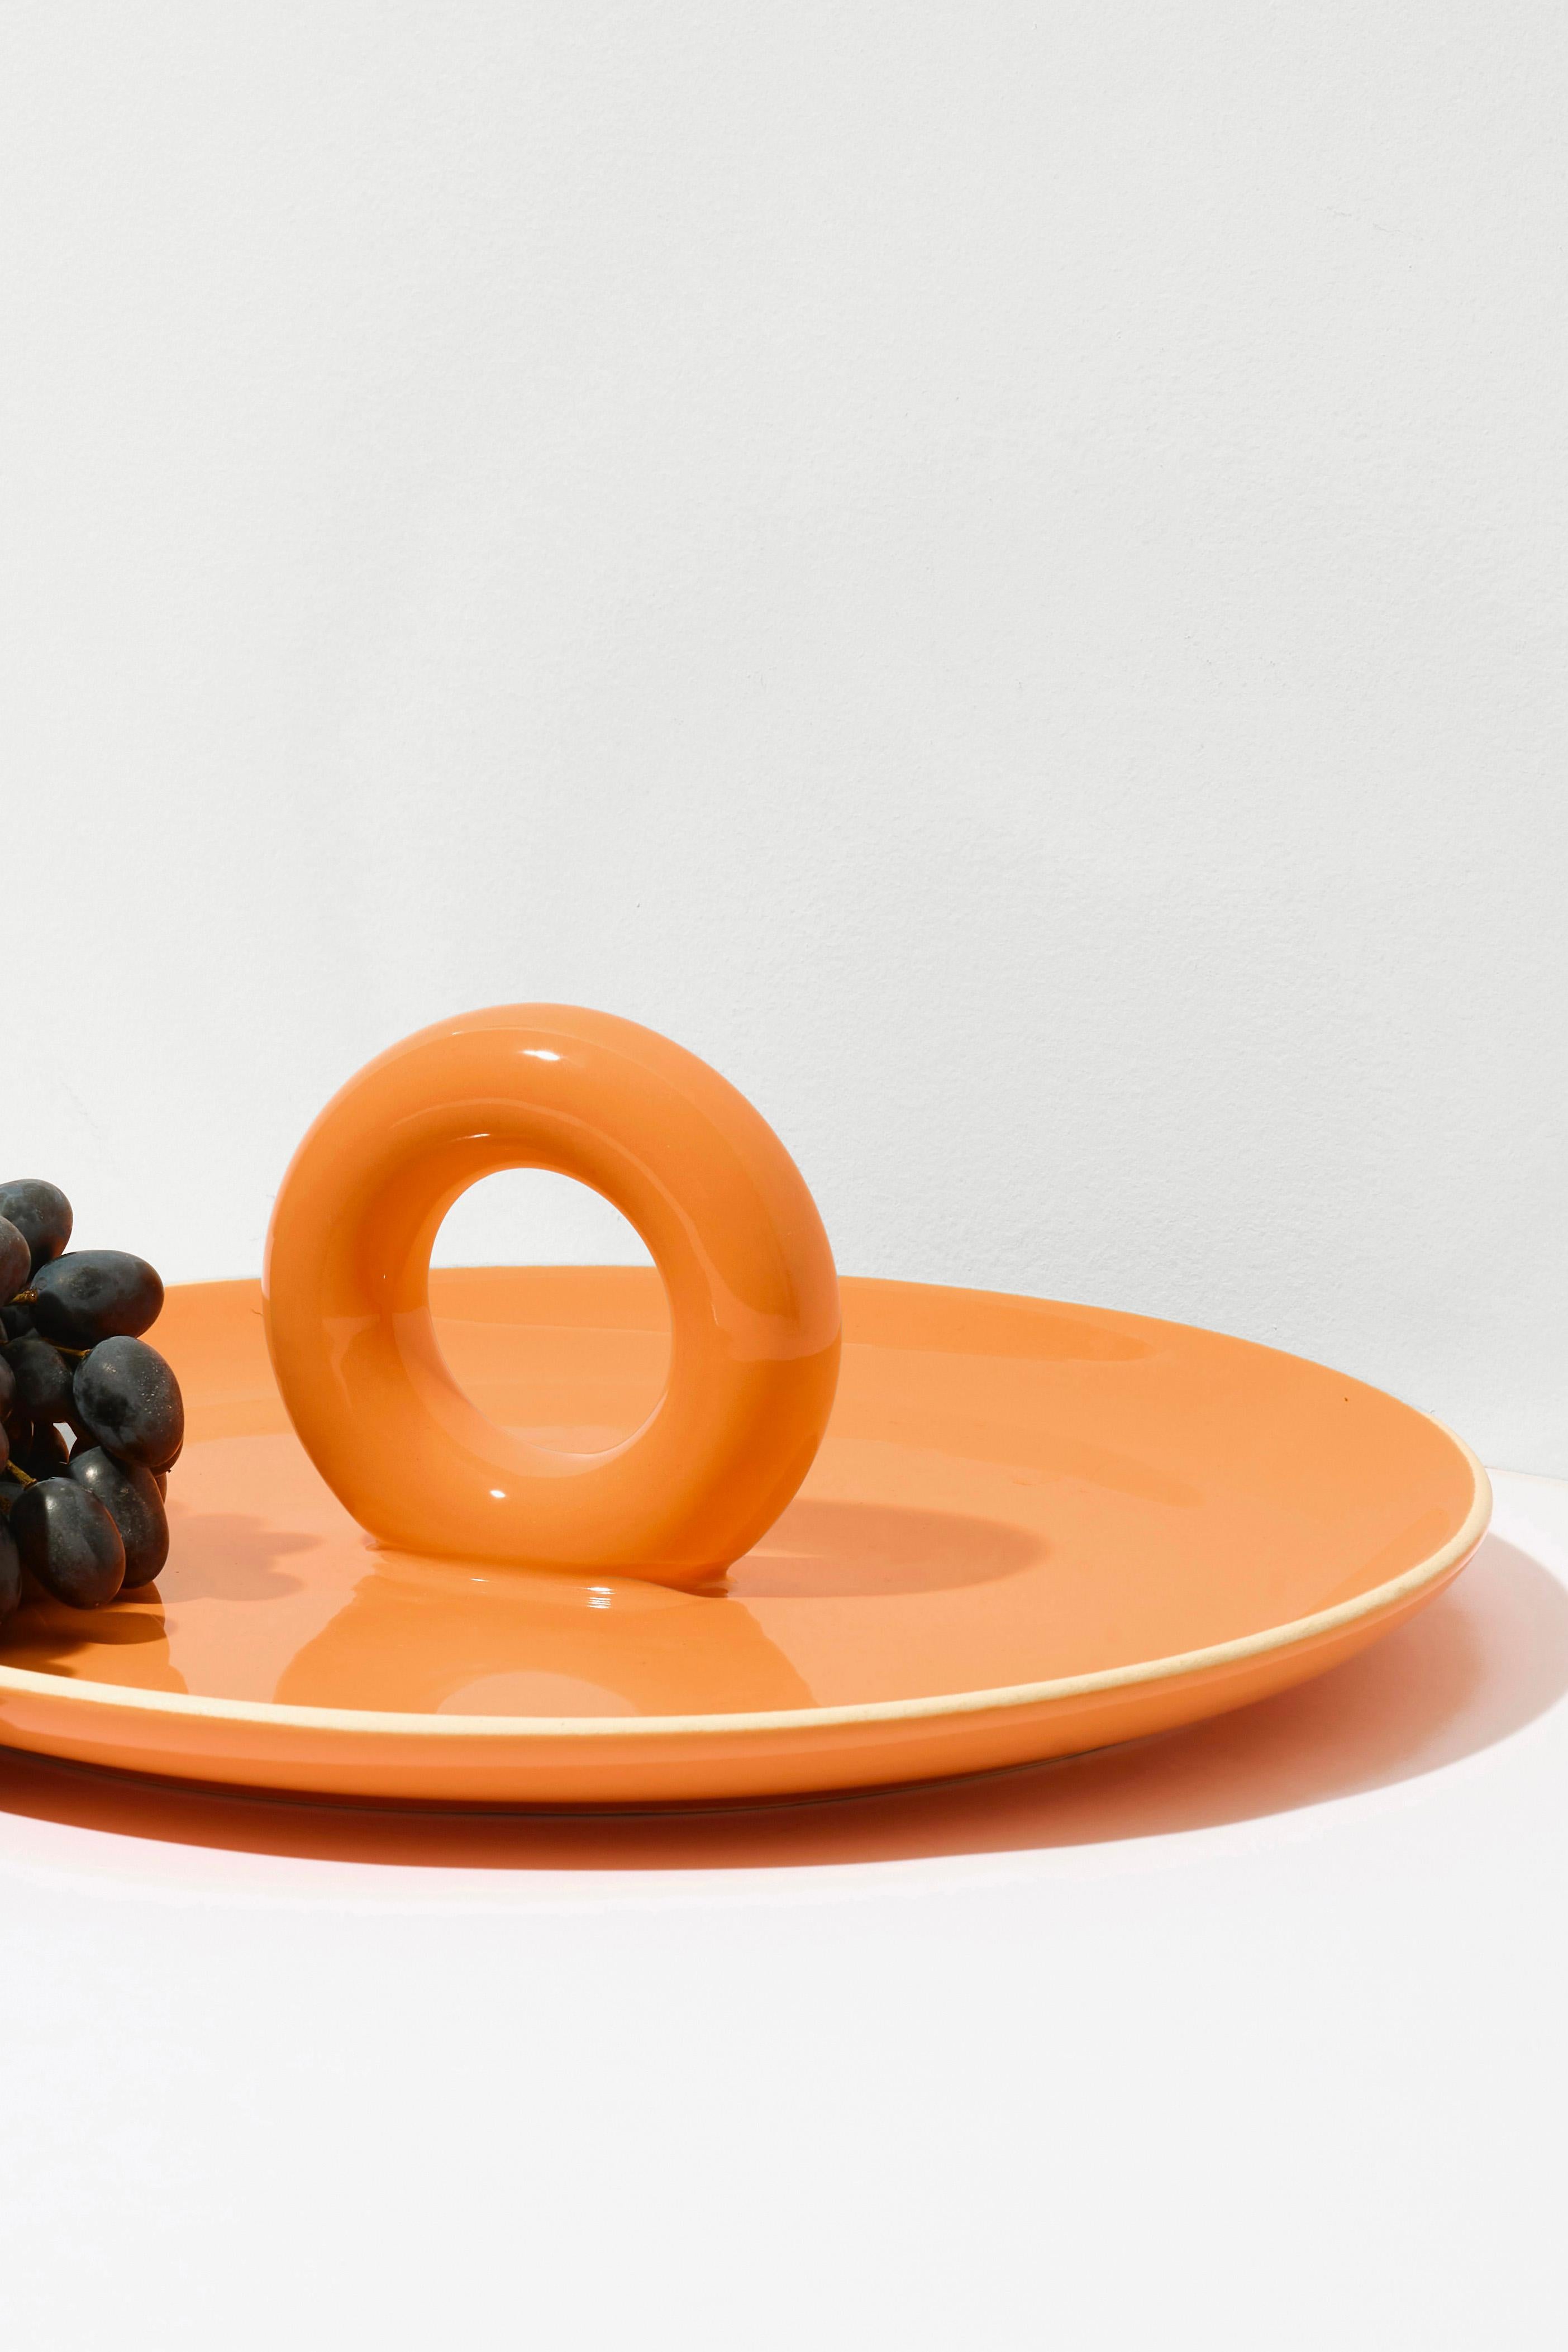 ANIELA can be described in three words: perfect-fruit-plate! Of course, it works just as well for serving sweets or savory snacks. Its wide base and a funny pretzel-shaped handle gain a distinctive character thanks to the intense glaze color. The